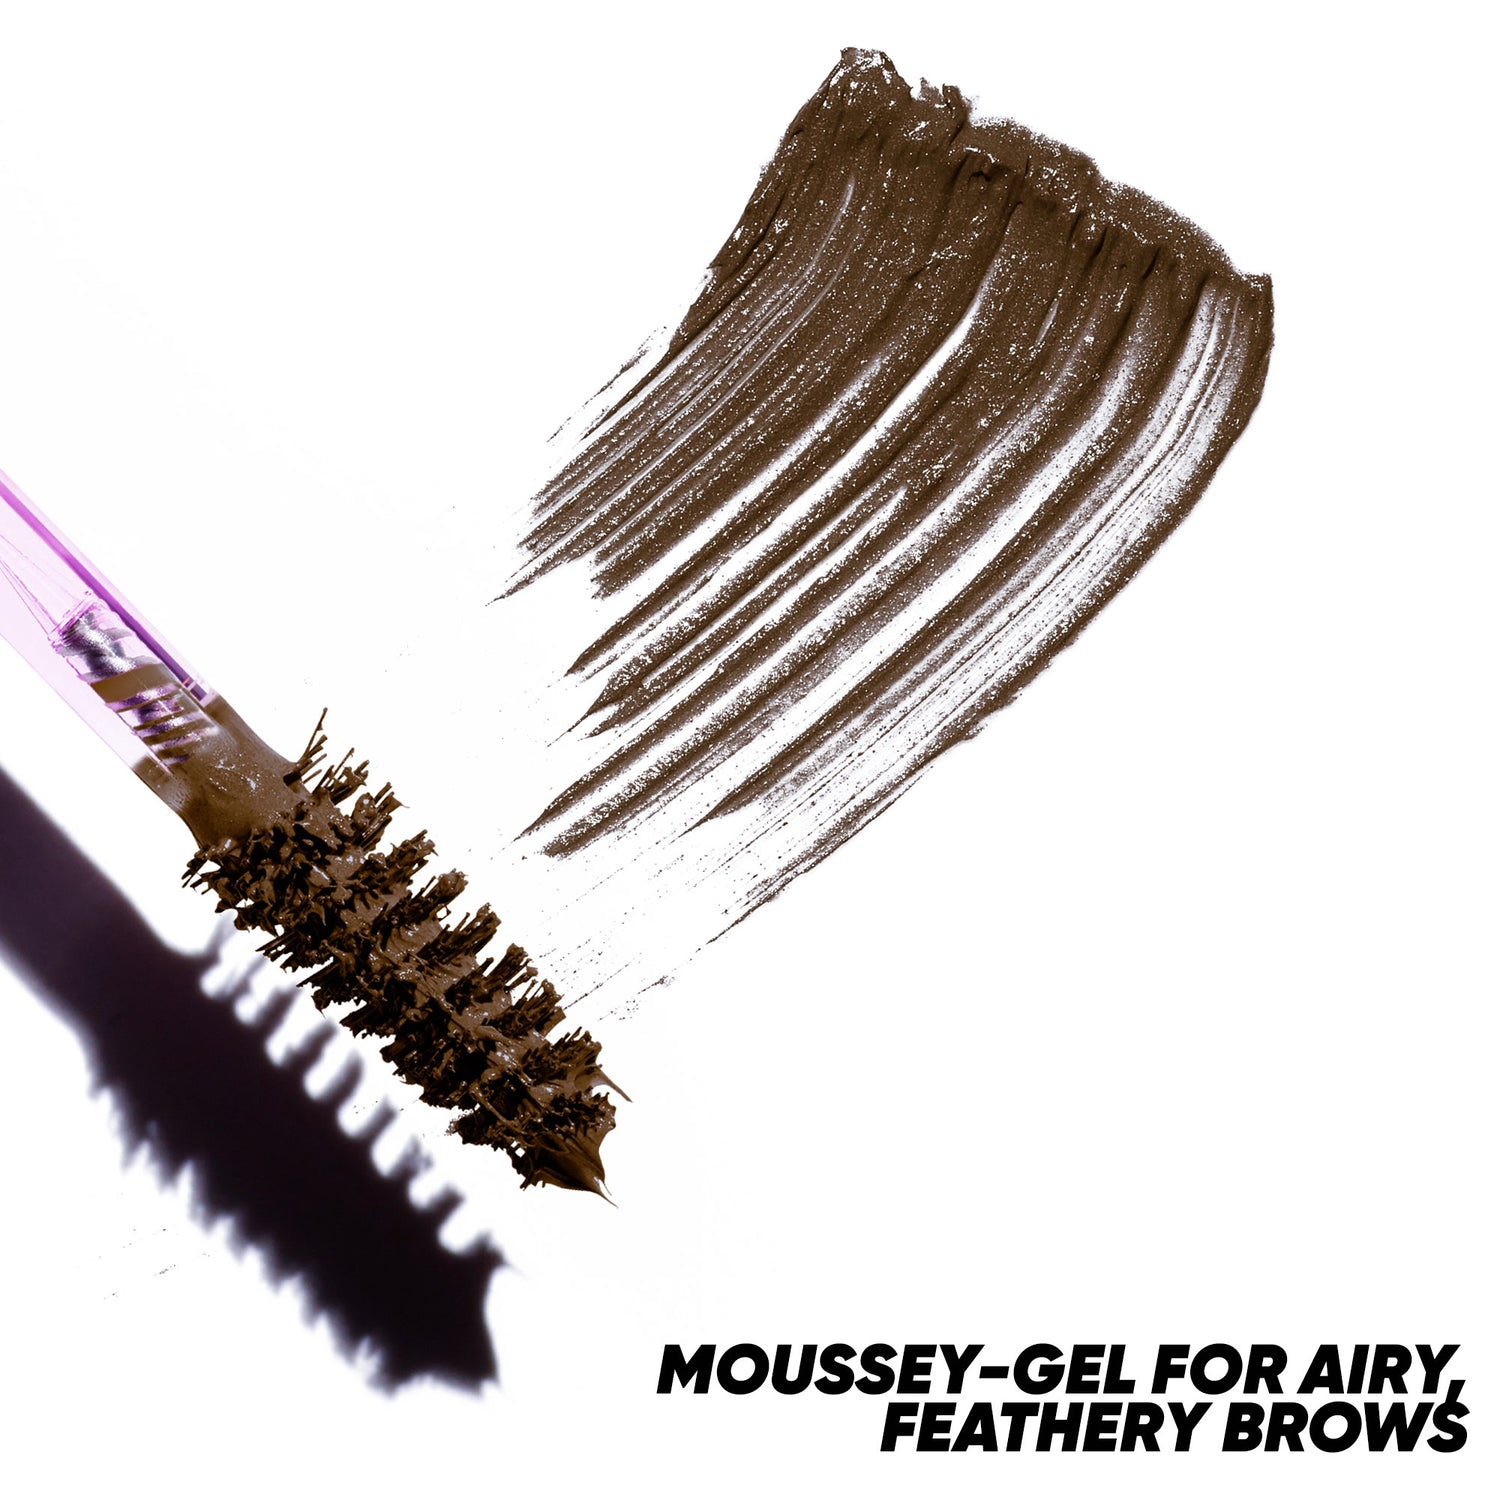 KOSAS Air Brow Tinted Gel Feathery Mousse